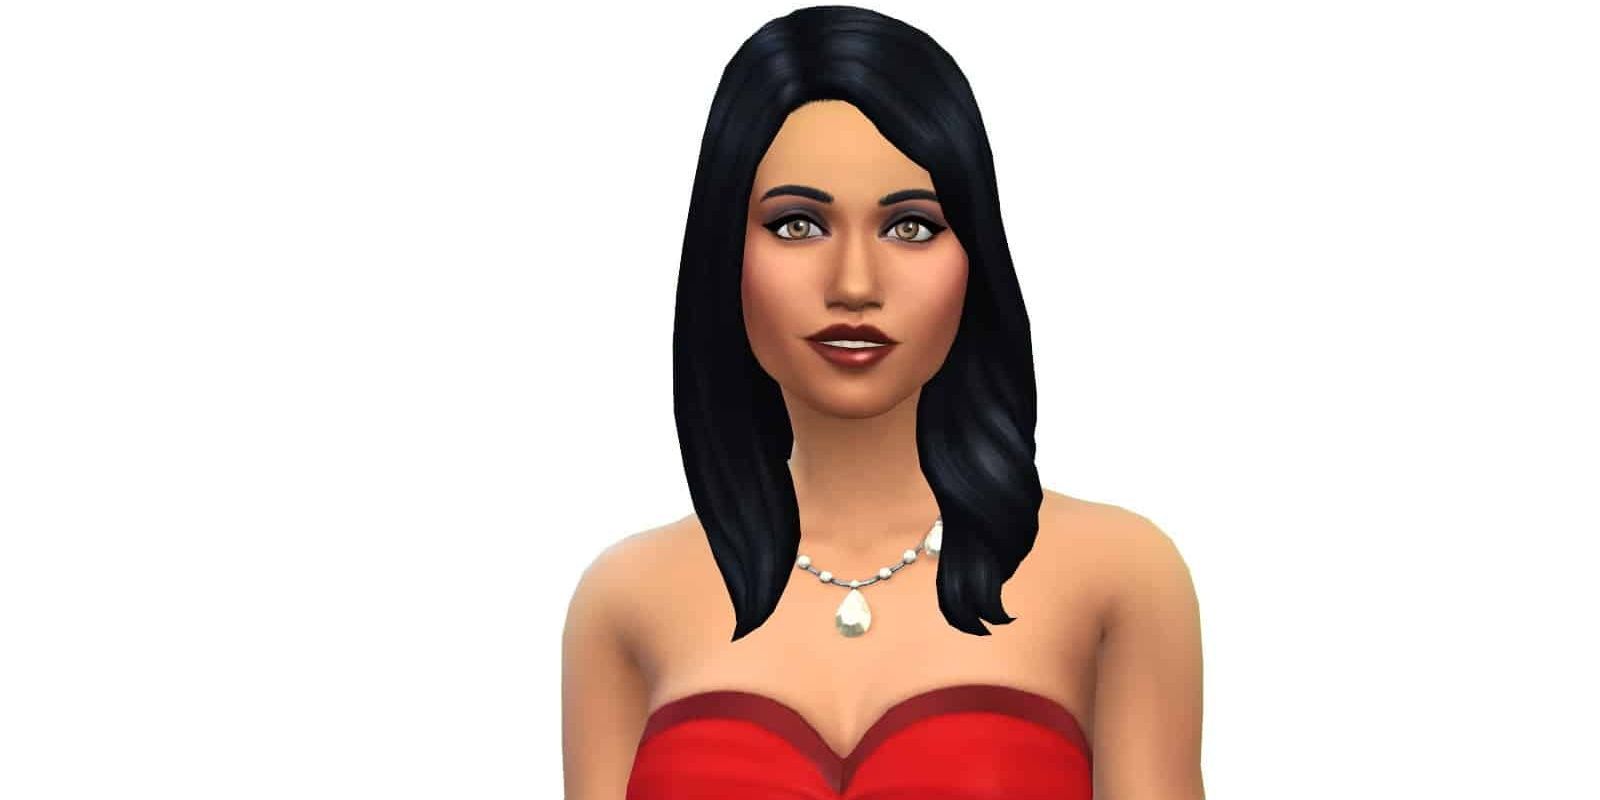 Bella Goth stands in front of a white background